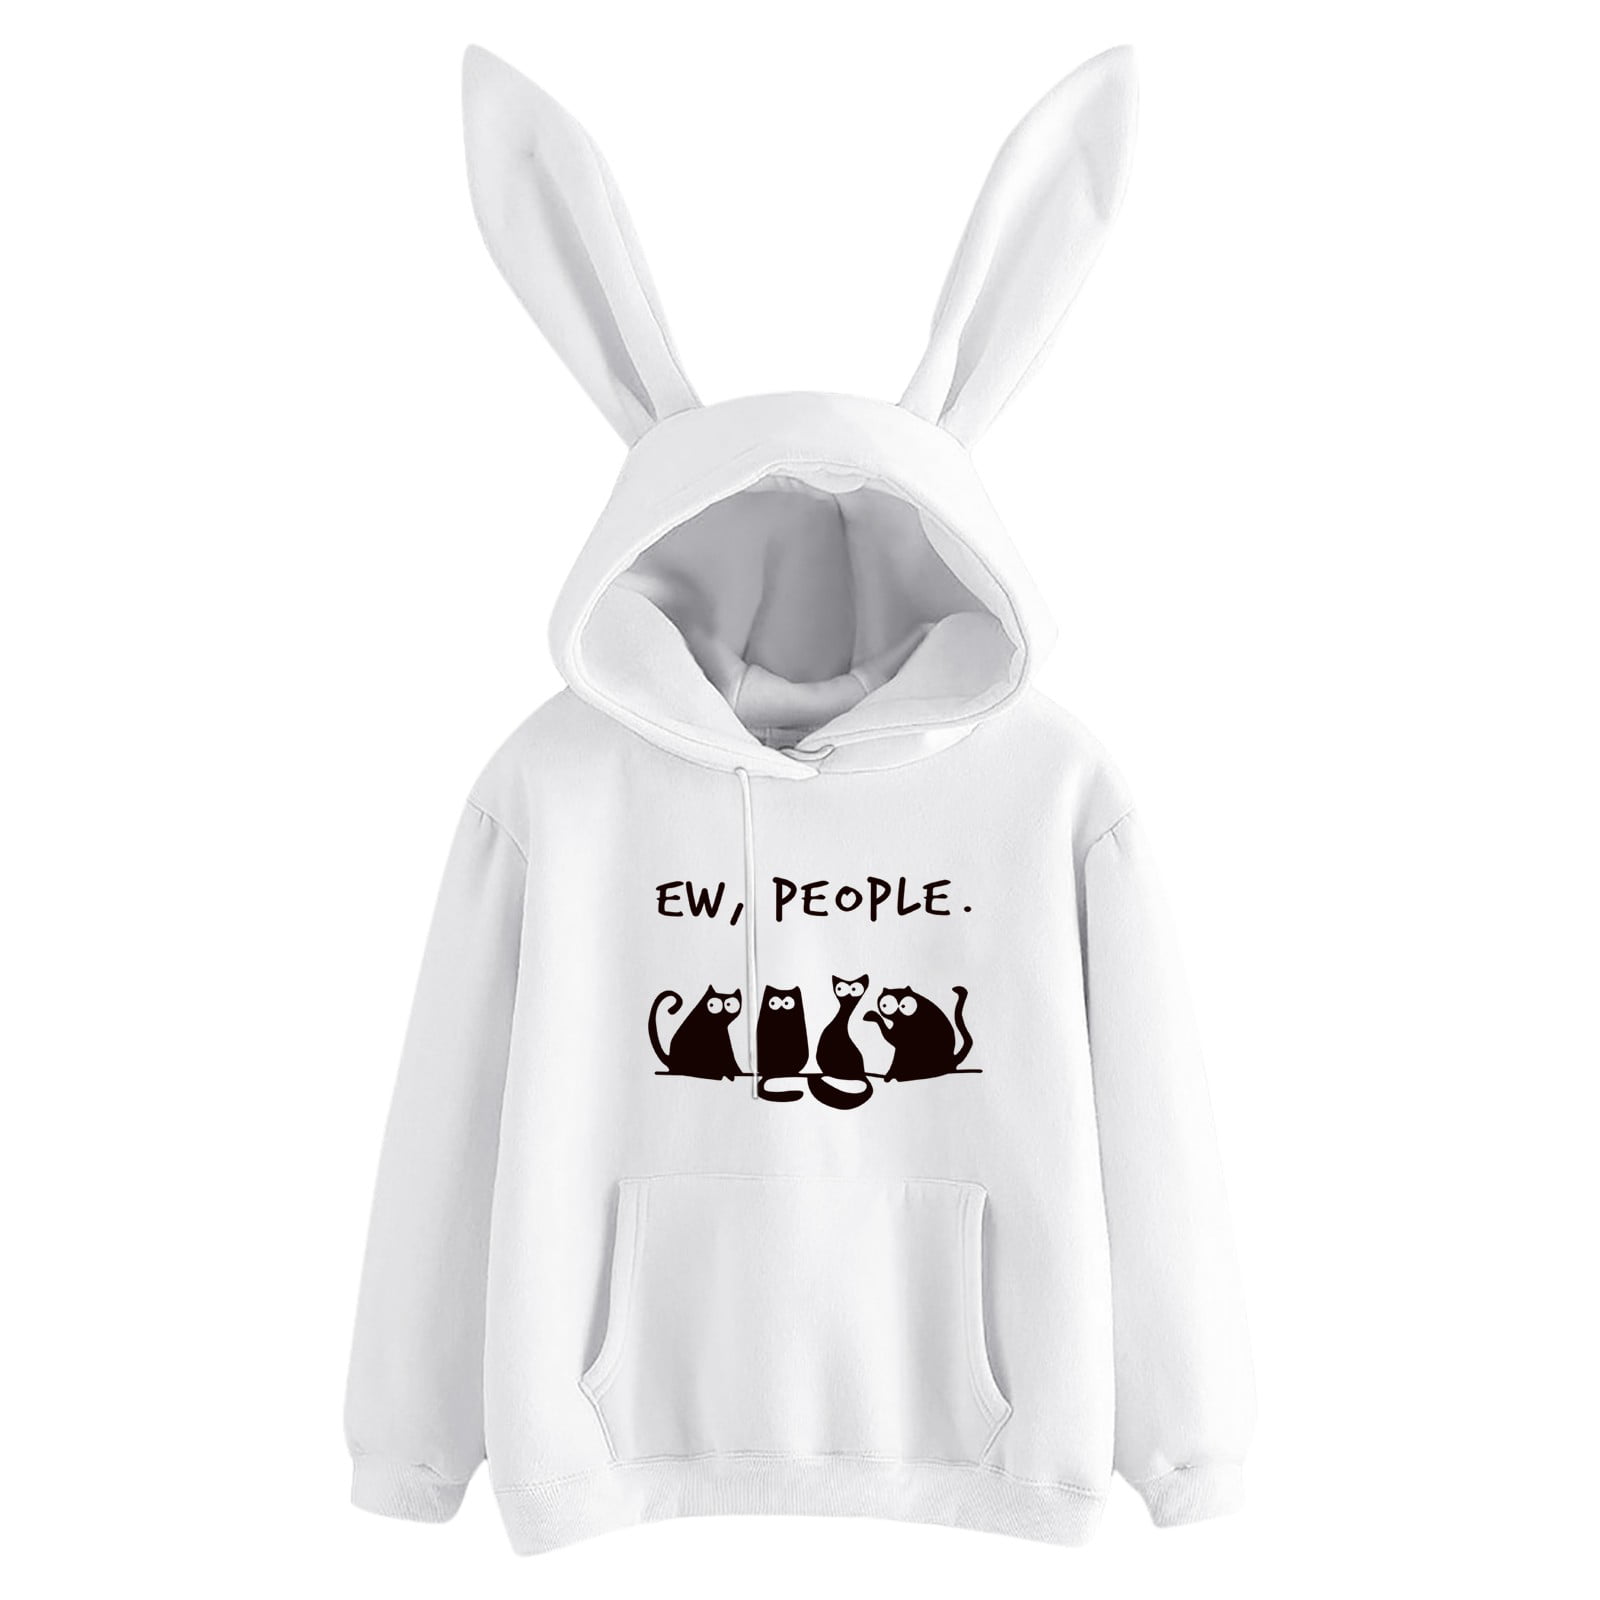 HGWXX7 Womens Hoodie Drawstring 1/4 Snap Solid Color Sweatshirt Casual Loose Long Sleeves Pullover With Pocket 